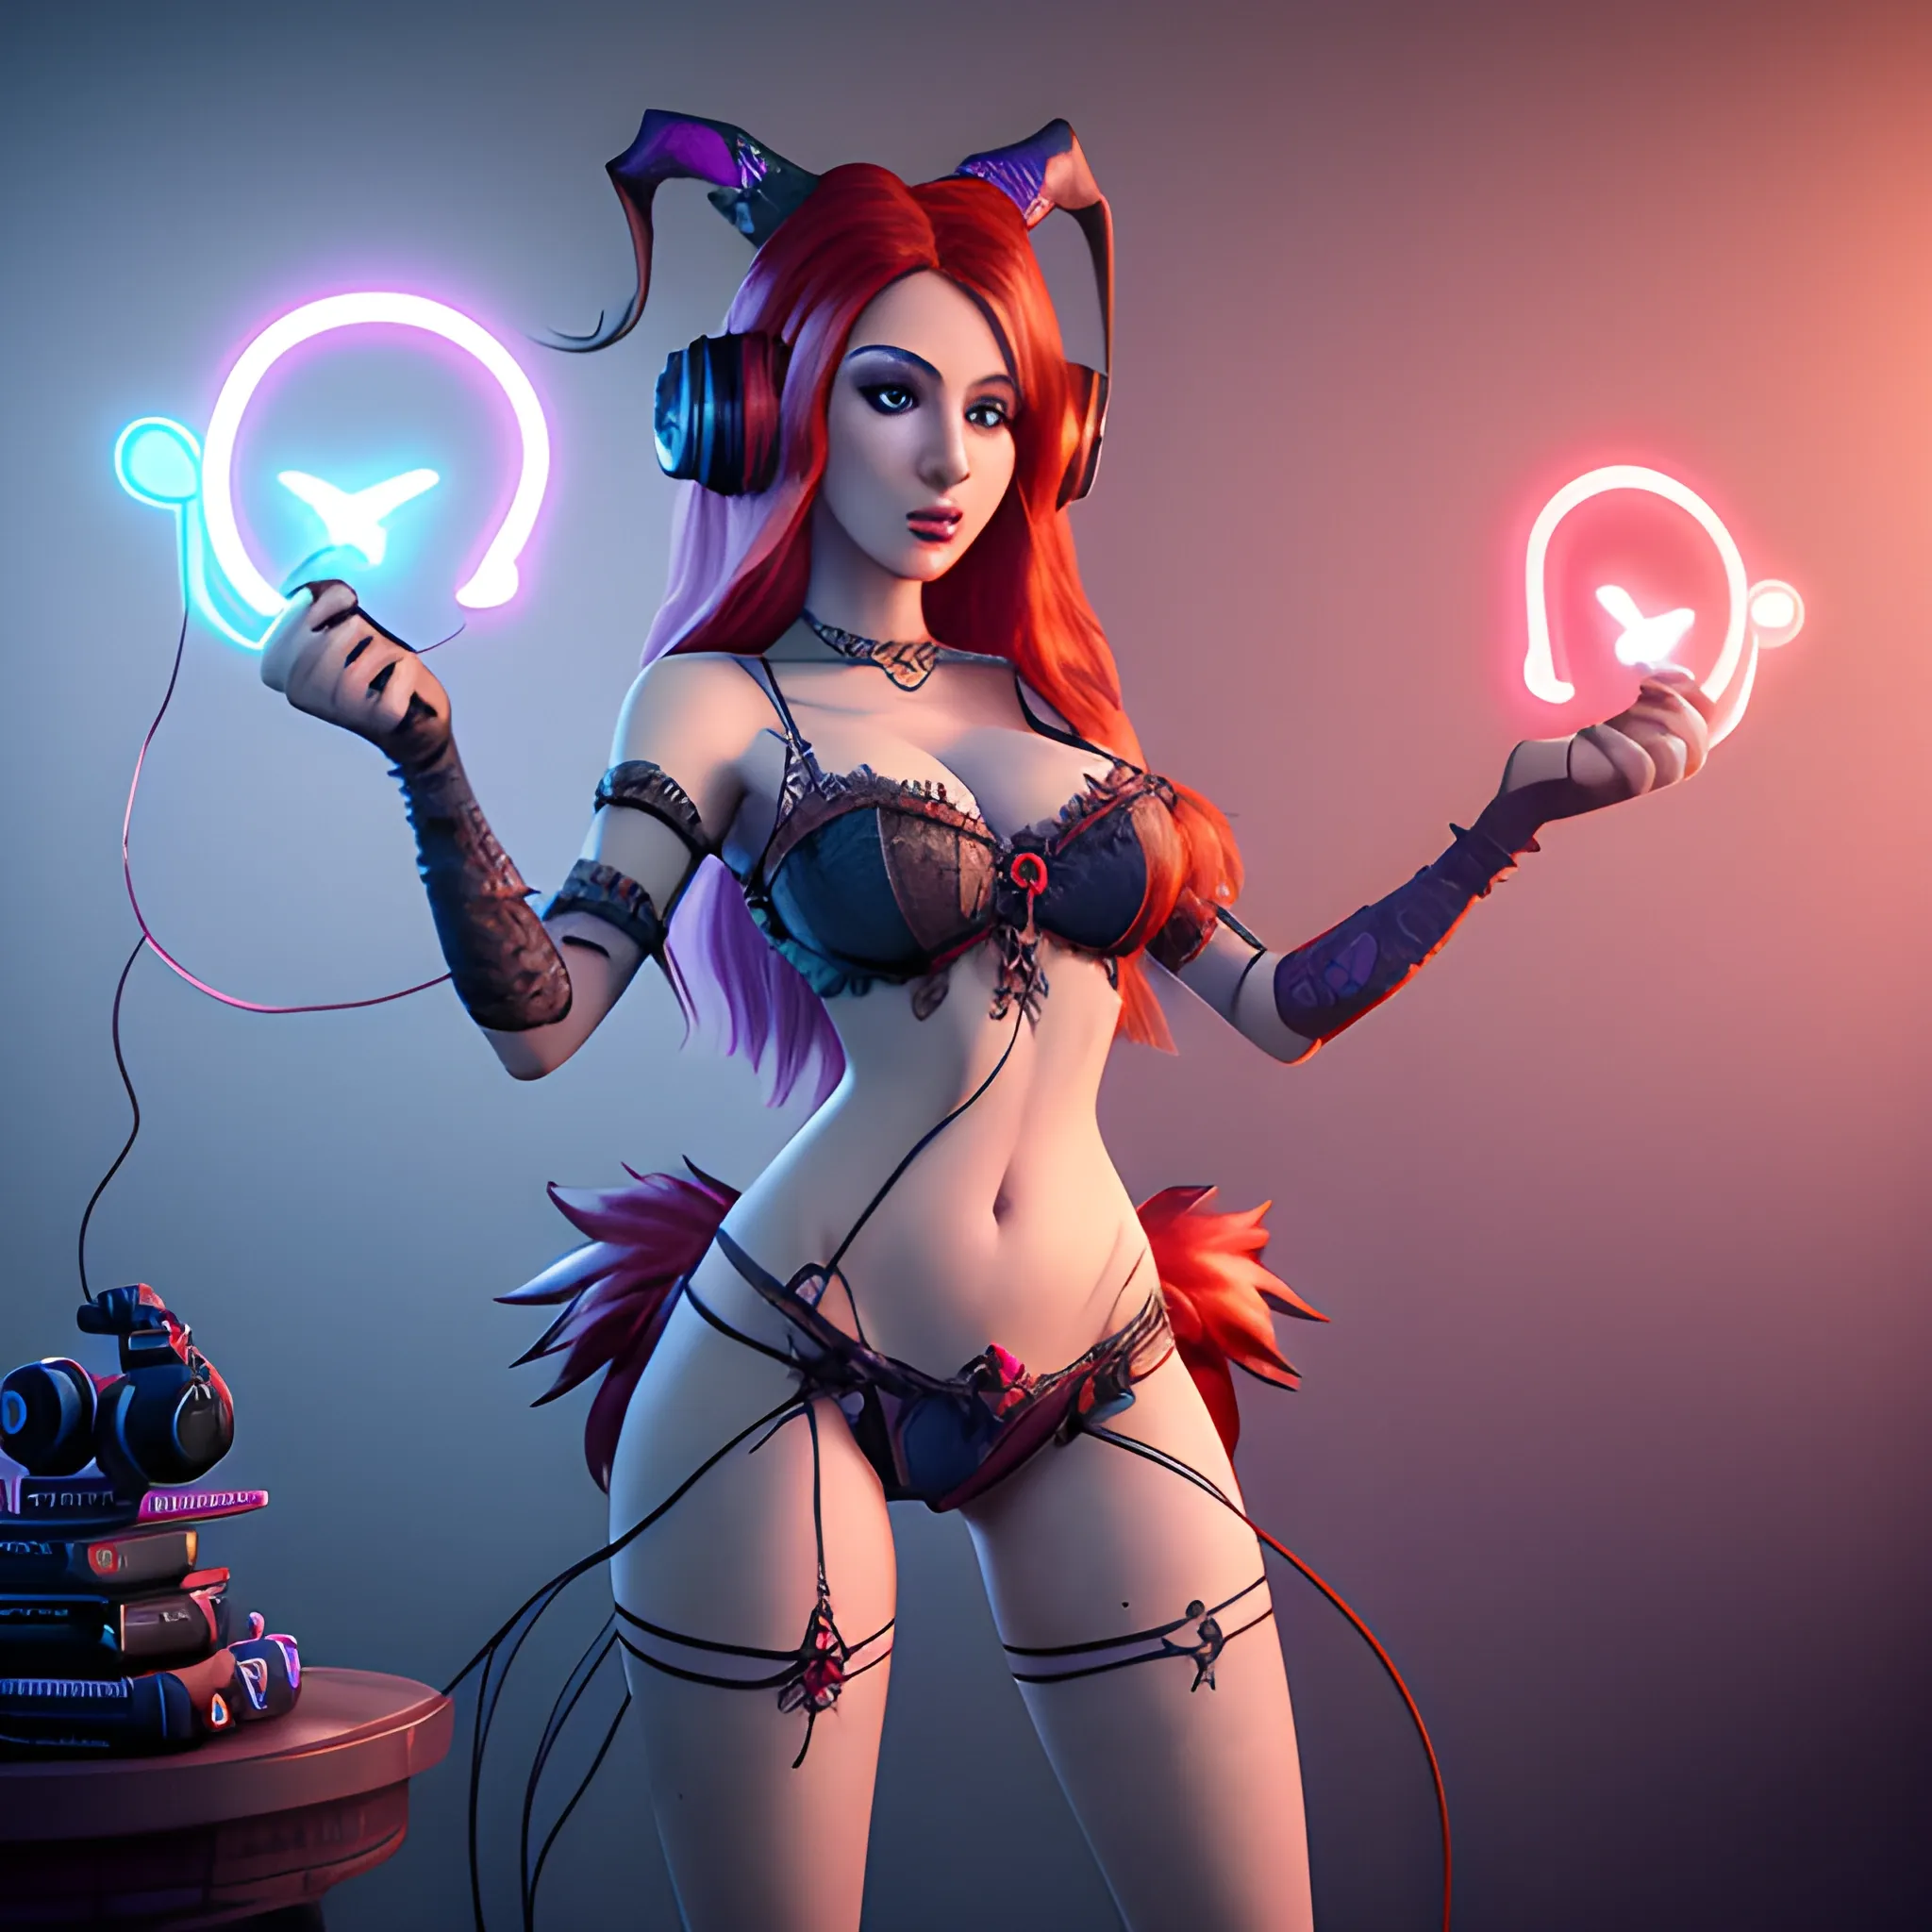 beautiful mascot of a witch with 
Beautiful hairs, skimpy red clothes and attract gaming headphones , She has a gaming PS5 controller in her hand, breasty, high fantasy, 8k, high resolution, high quality, photorealistic, hyperealistic, detailed, detailed matte painting, deep color, fantastical, intricate detail, splash screen, complementary colors, fantasy concept art, 8k resolution trending on Artstation Unreal Engine 5, Cartoon. Gaming streamer , Trippy, Cartoon, streaming room, strong colours, eye catching mascot , Cartoon